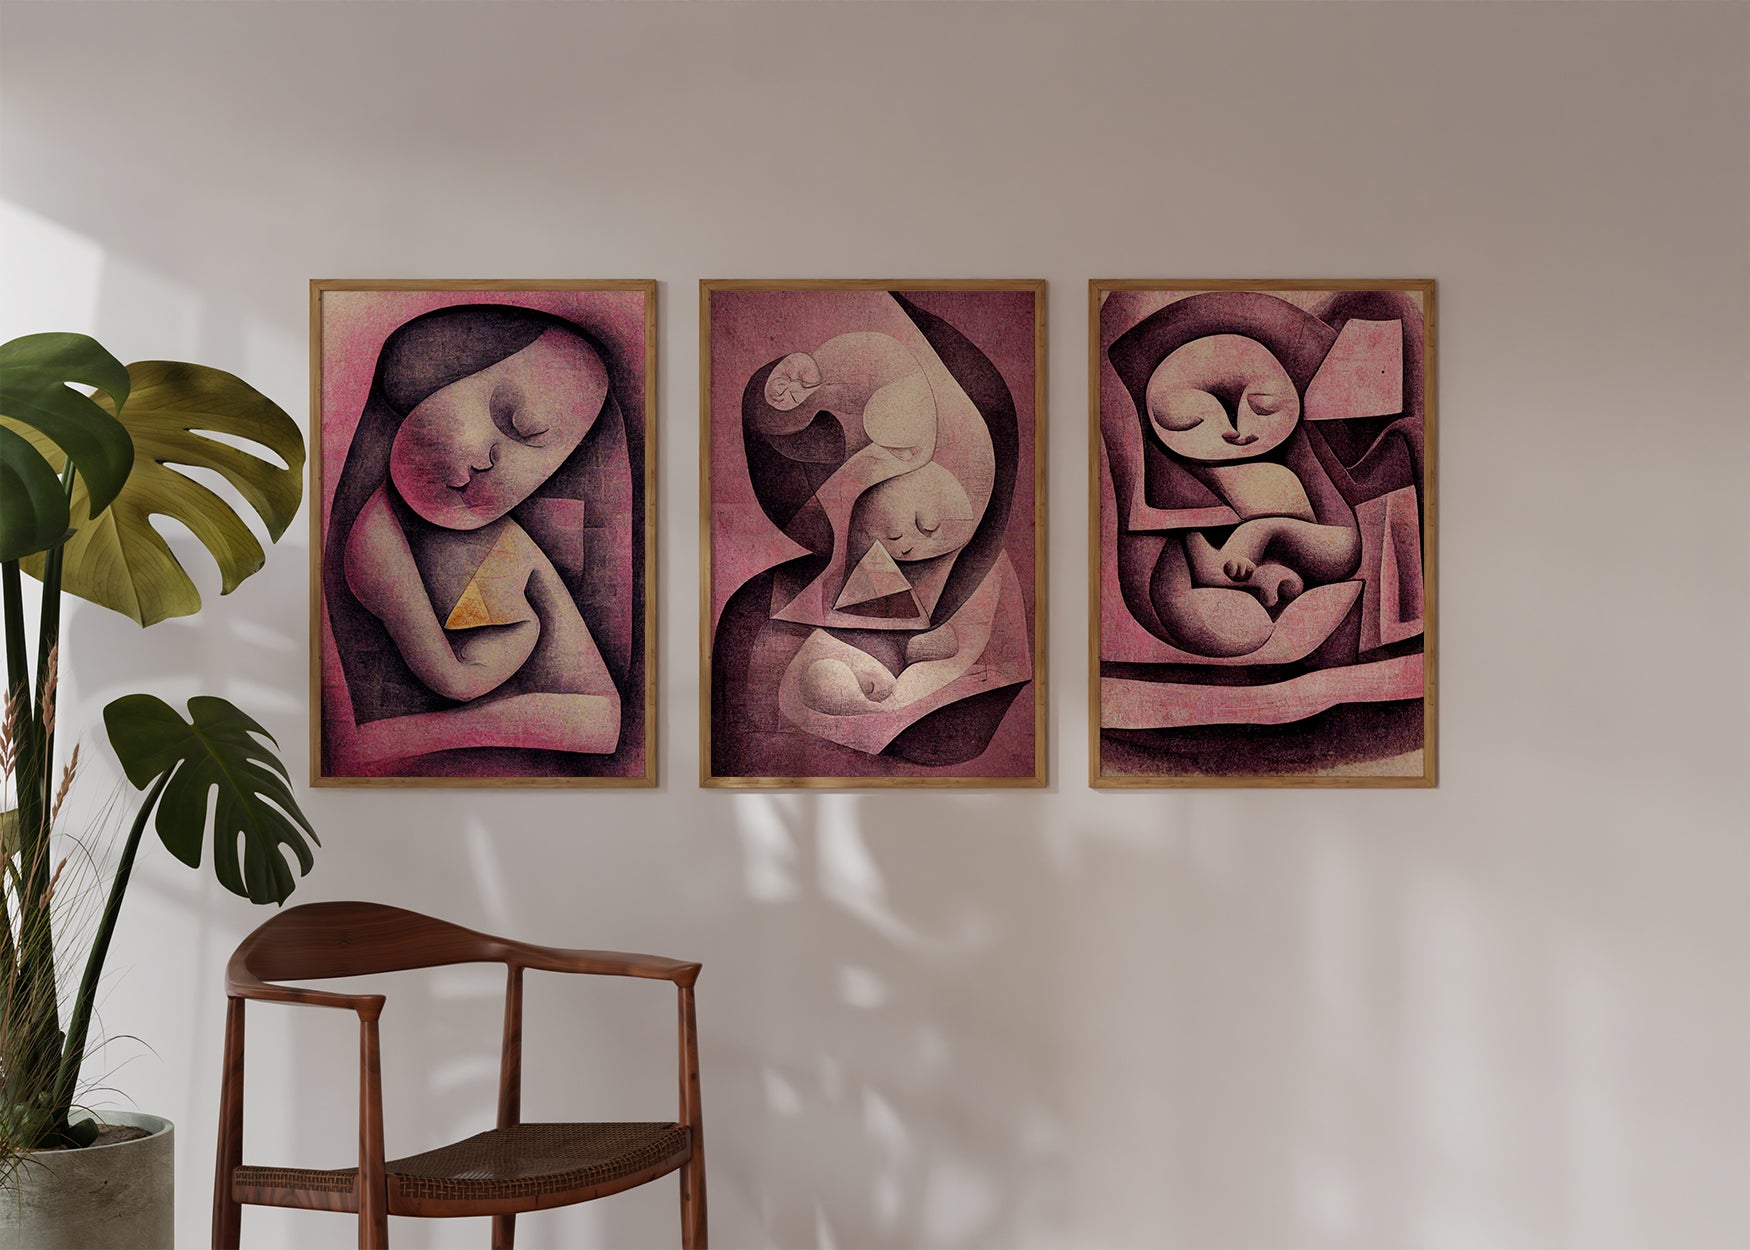 Fetal Ultrasound Art - A heartwarming depiction of pregnancy, ideal for gynecology clinic decor and creating a warm ambiance.